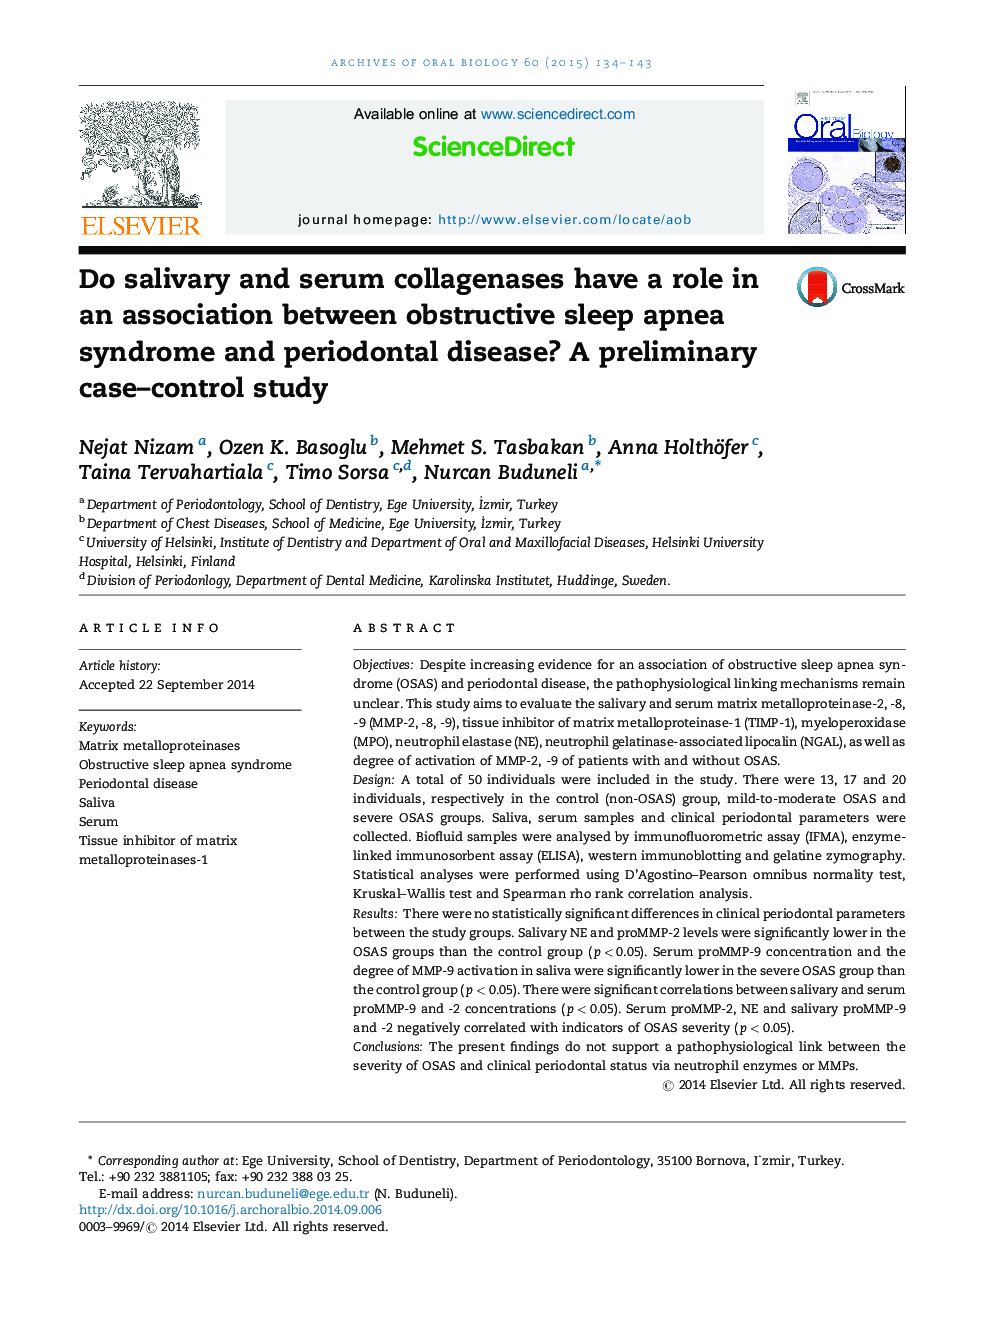 Do salivary and serum collagenases have a role in an association between obstructive sleep apnea syndrome and periodontal disease? A preliminary case–control study